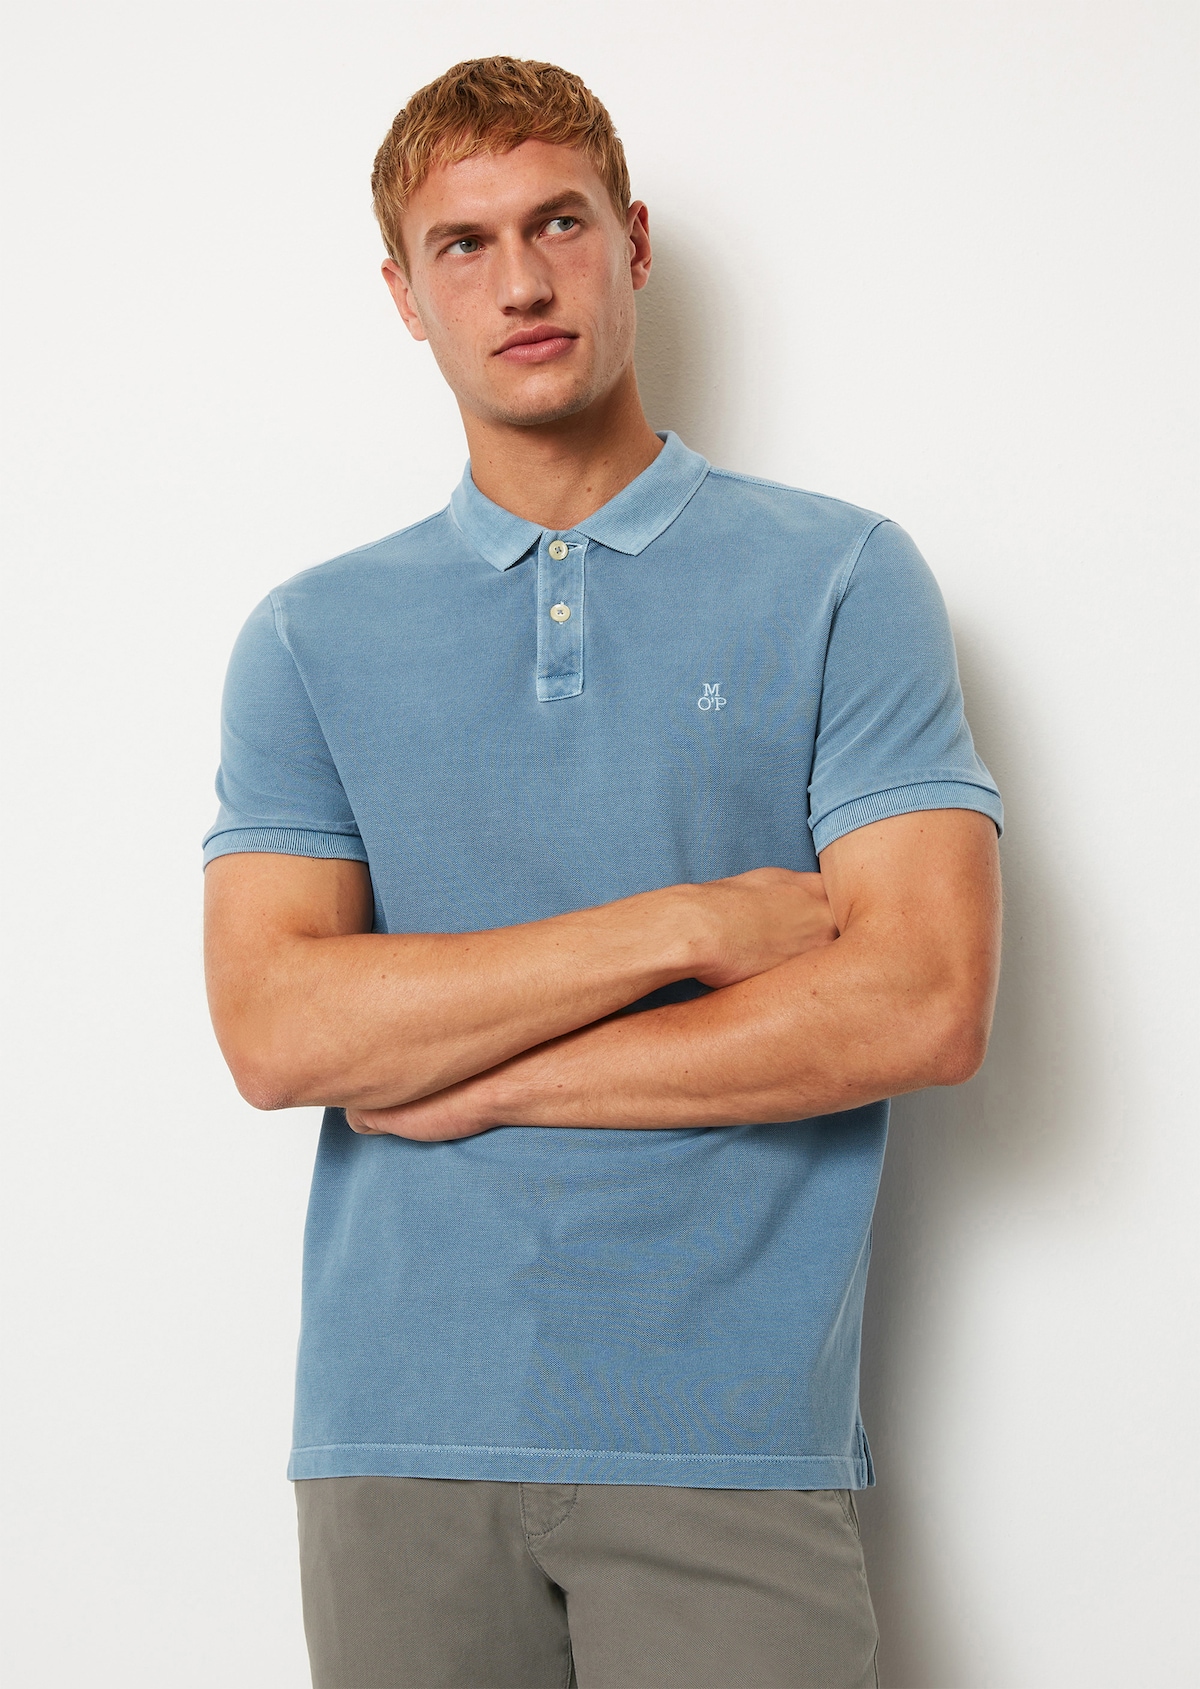 shirt Polos from cotton - | a sleeve made in Short O\'POLO | blue piqué MARC regular organic fit polo